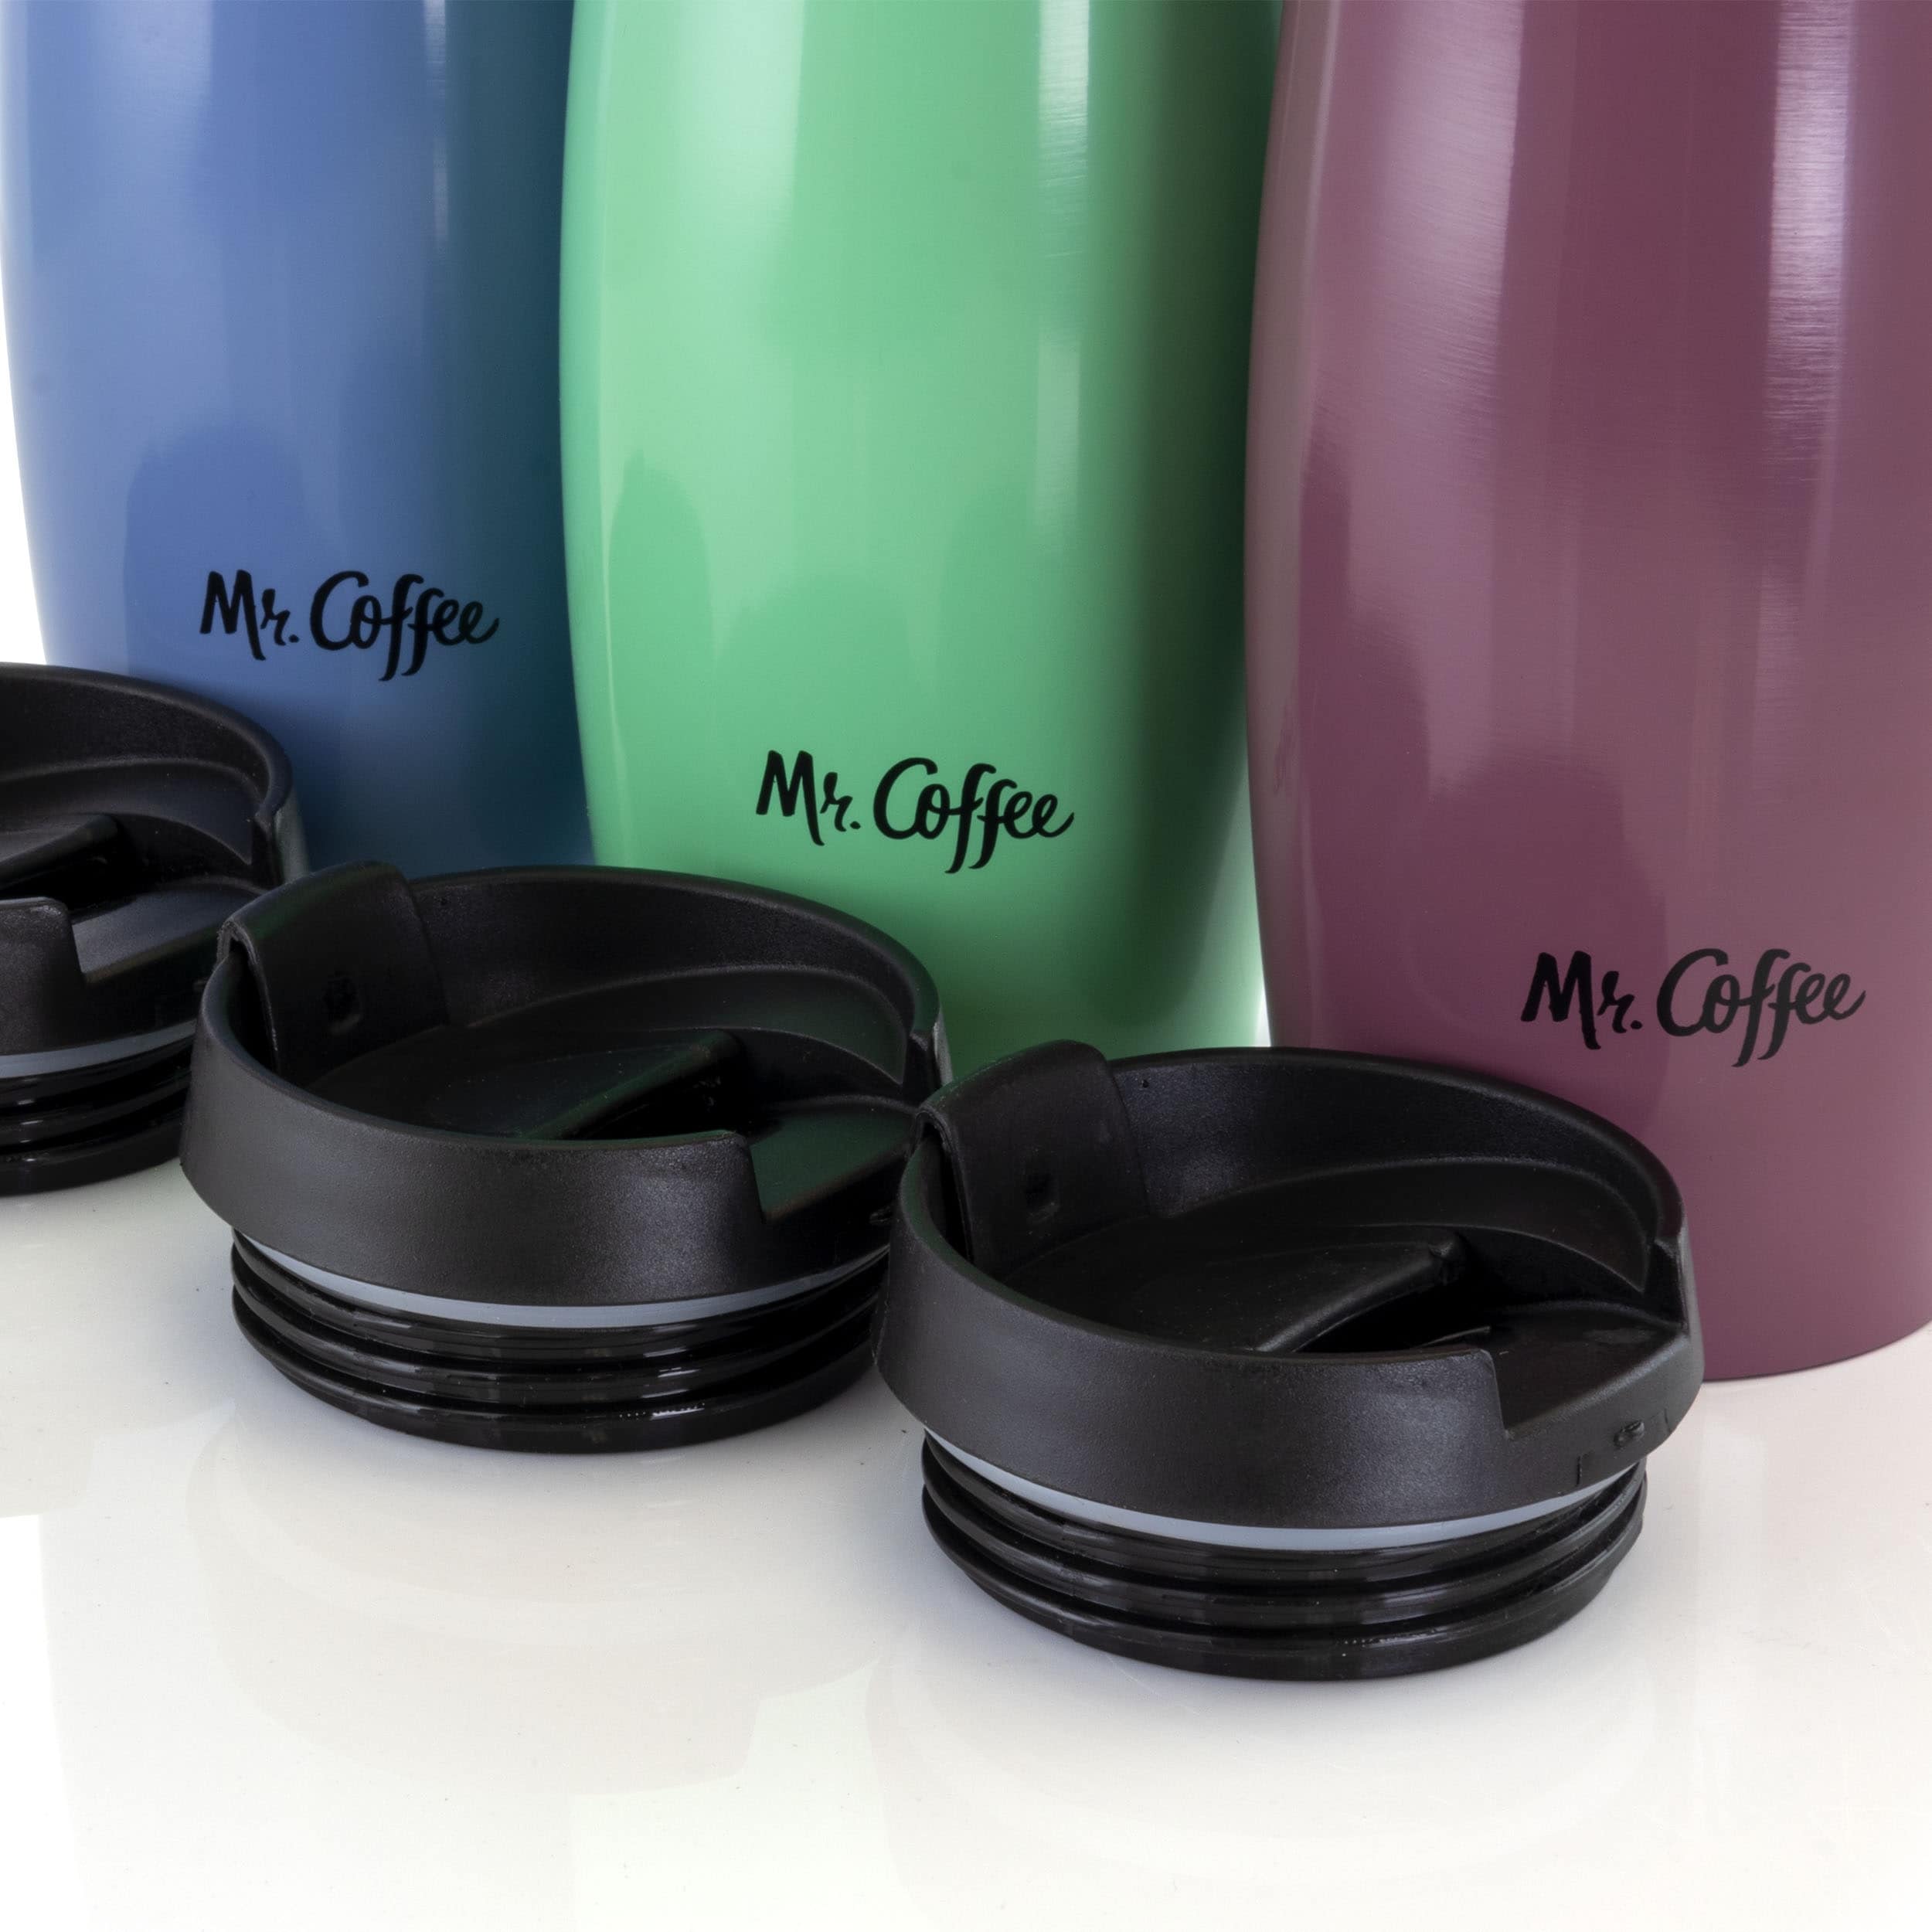 Mr. Coffee 12.5 Oz Stainless Steel Insulated Thermal Set of 3